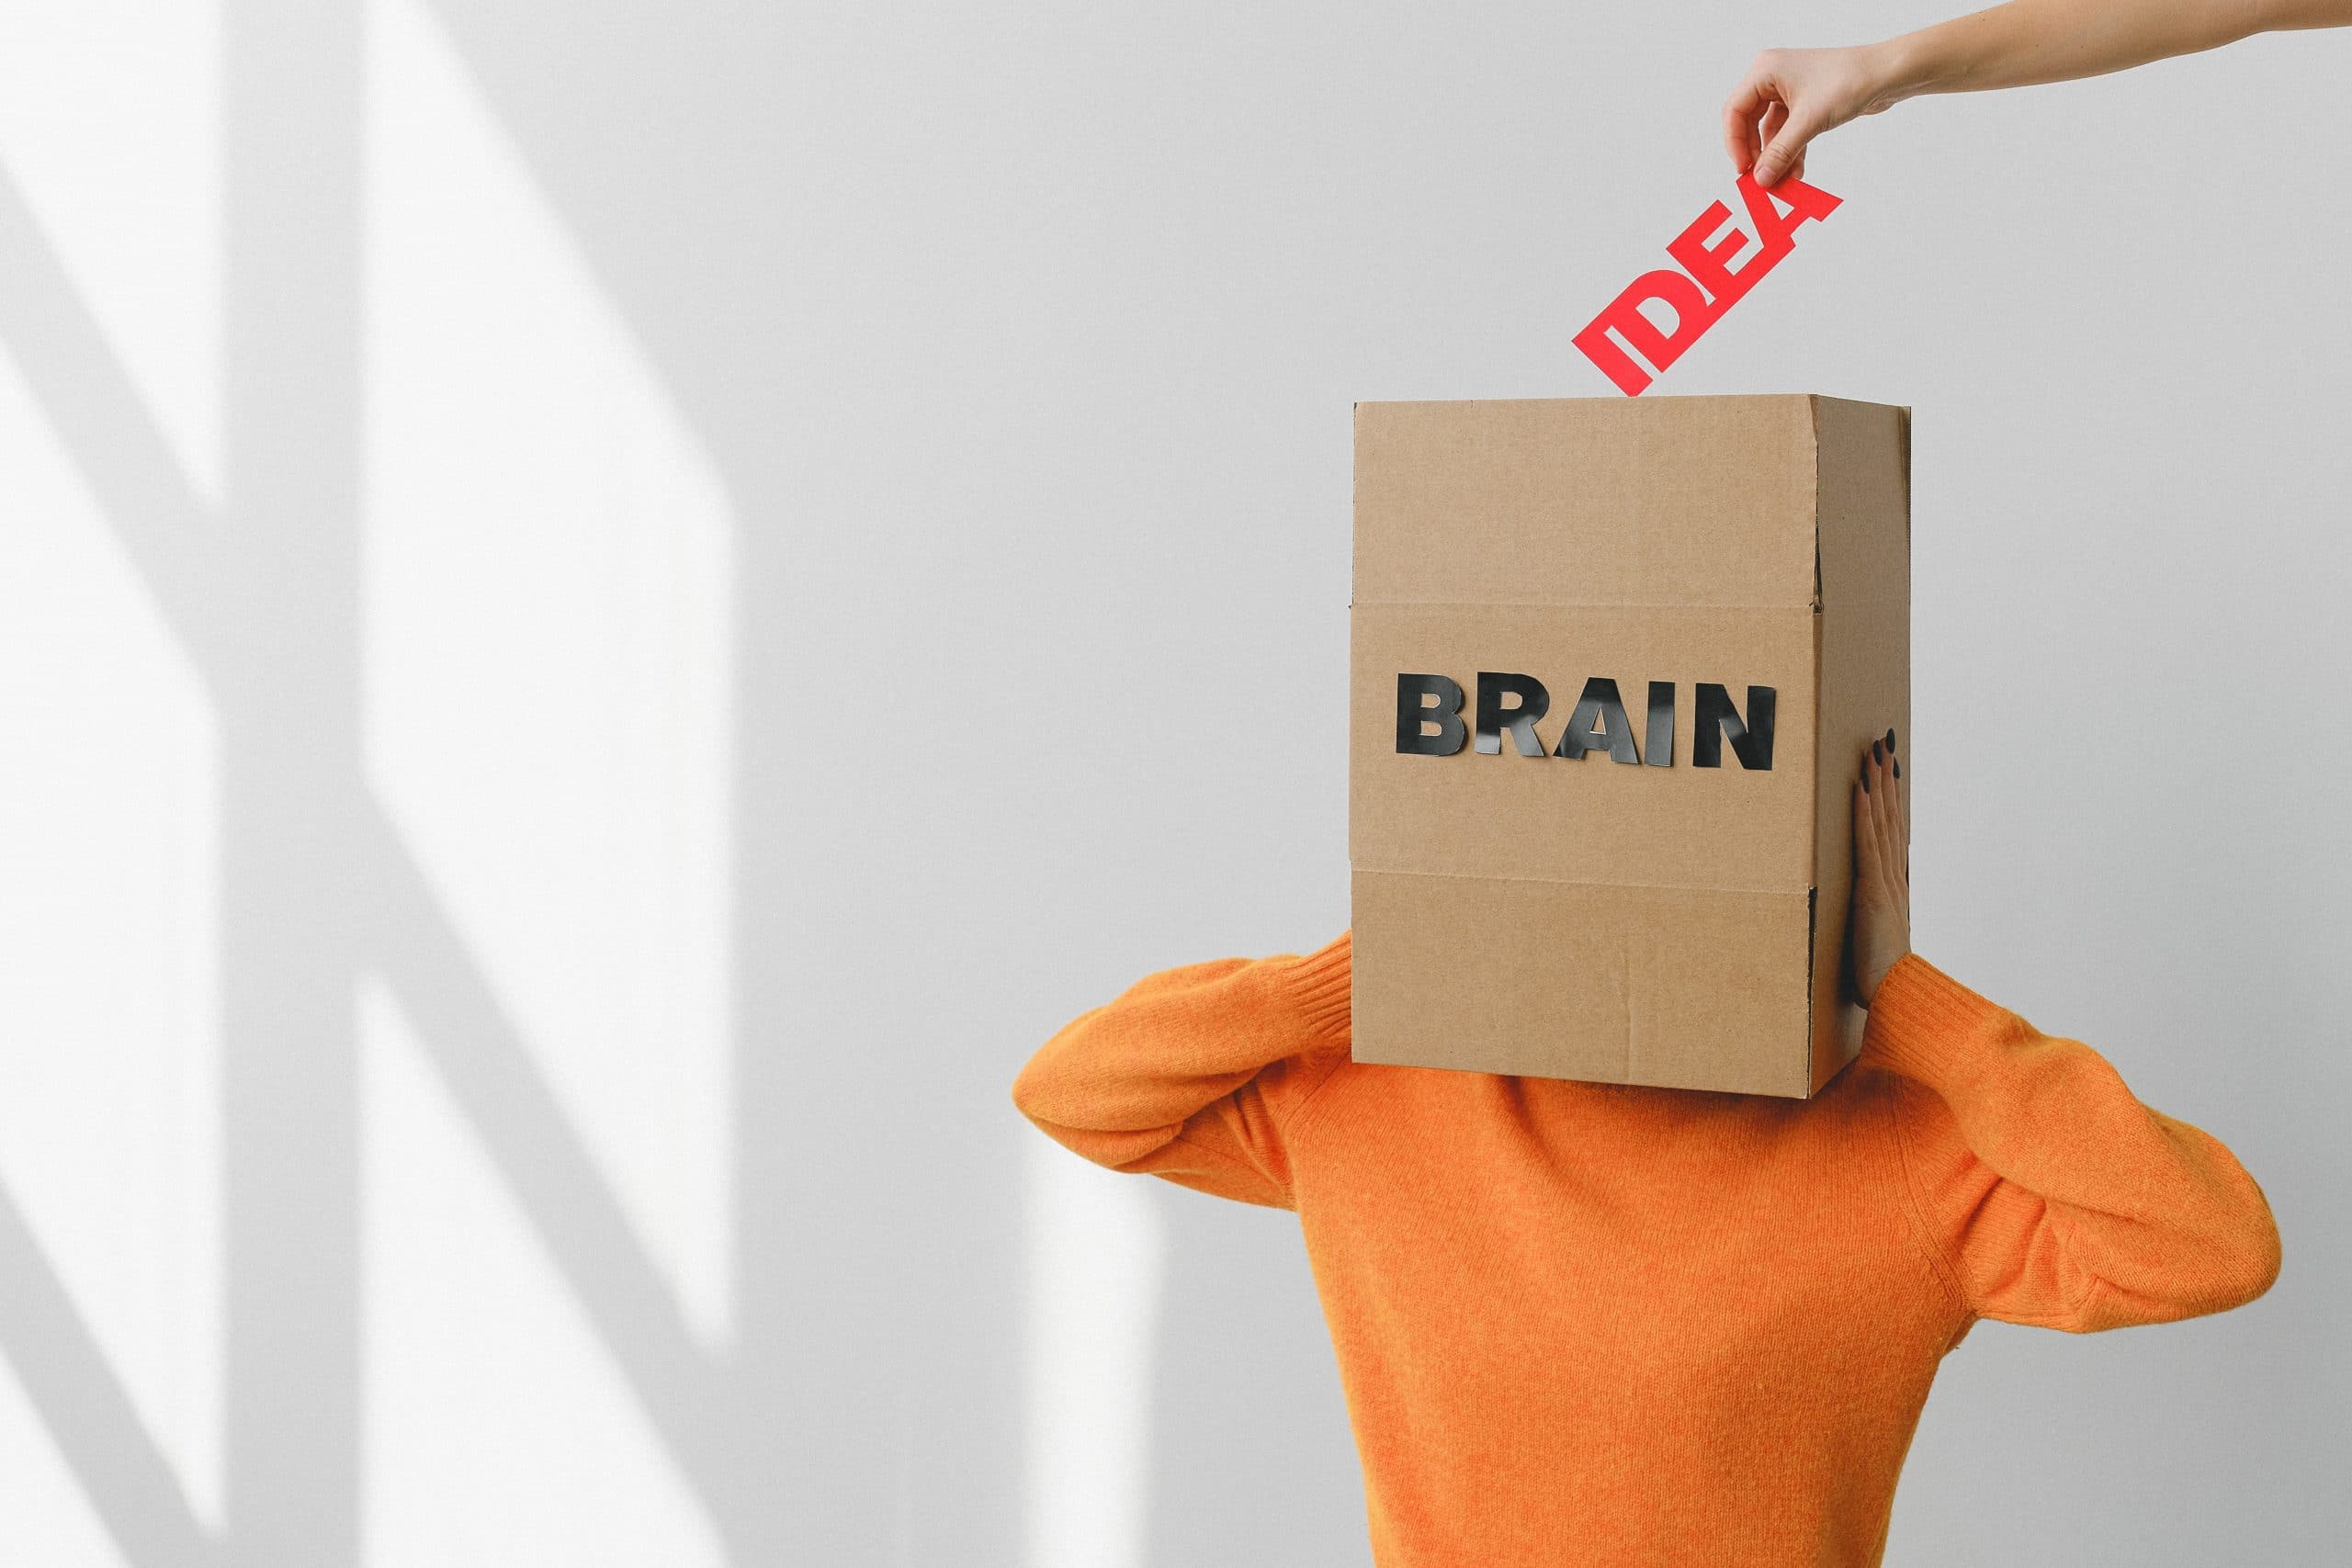 A photo of a person with a box over their head labelled "brain" and a hand putting the word "idea" into the box